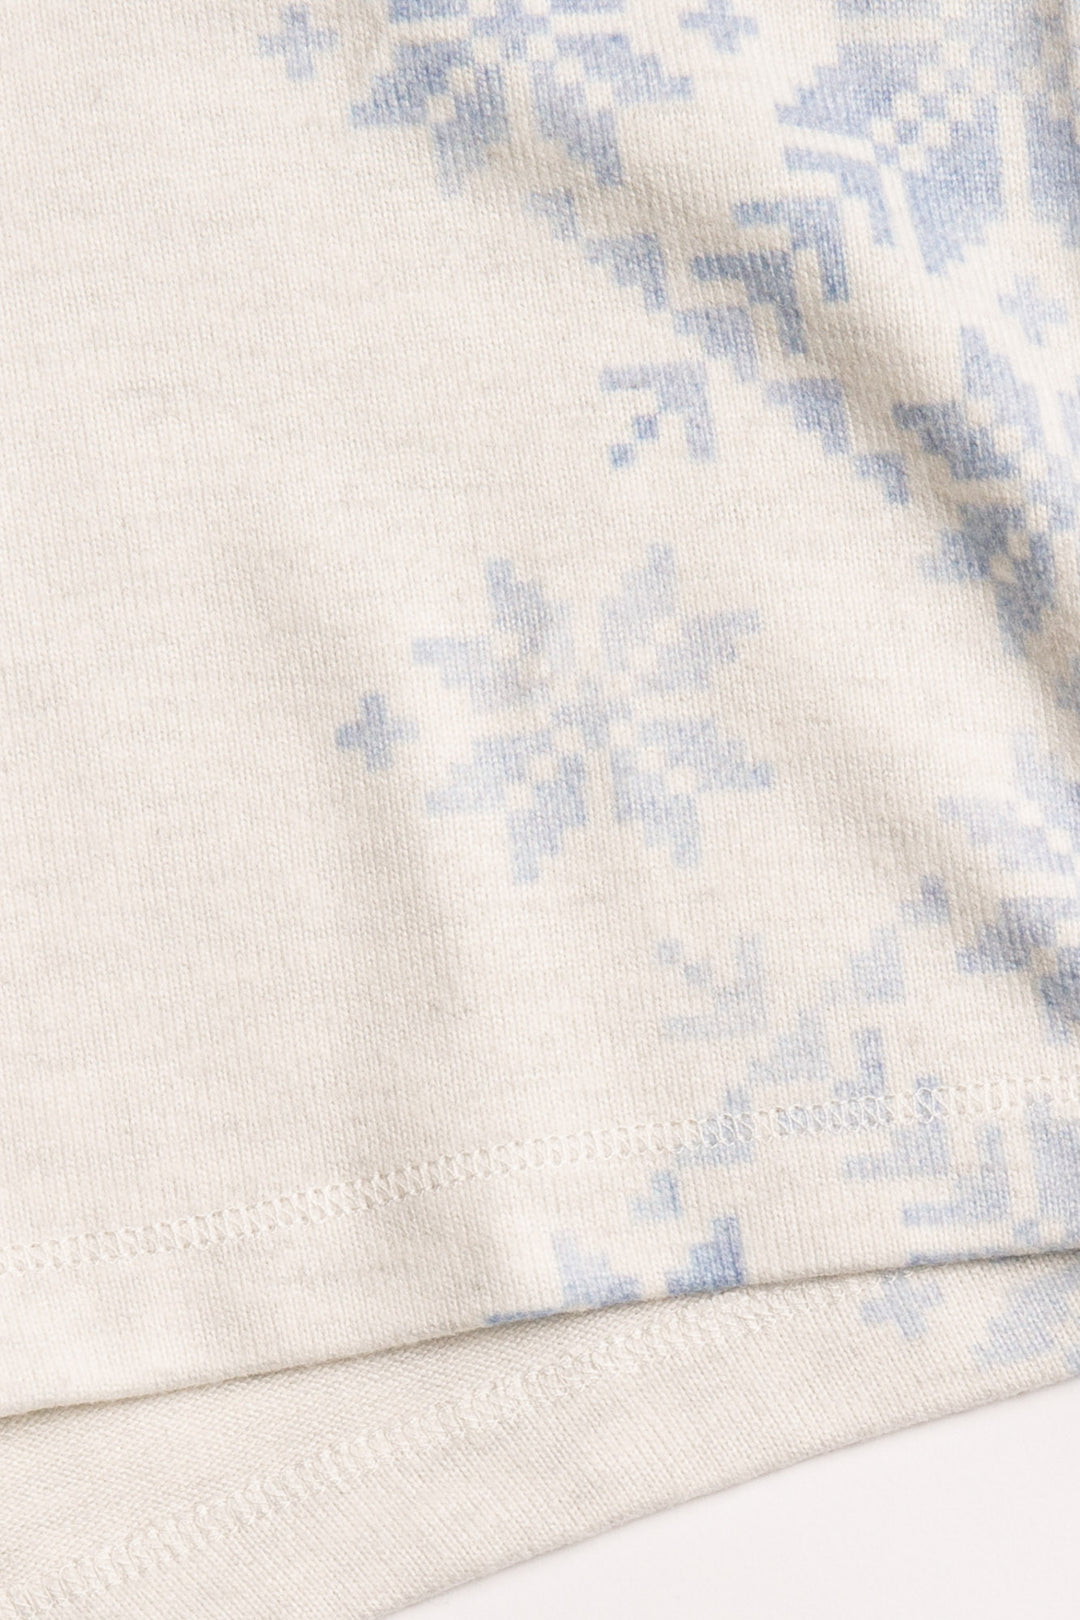 PJ short in ivory with blue snowflake pattern on sides. Tie waist. (7231881085028)